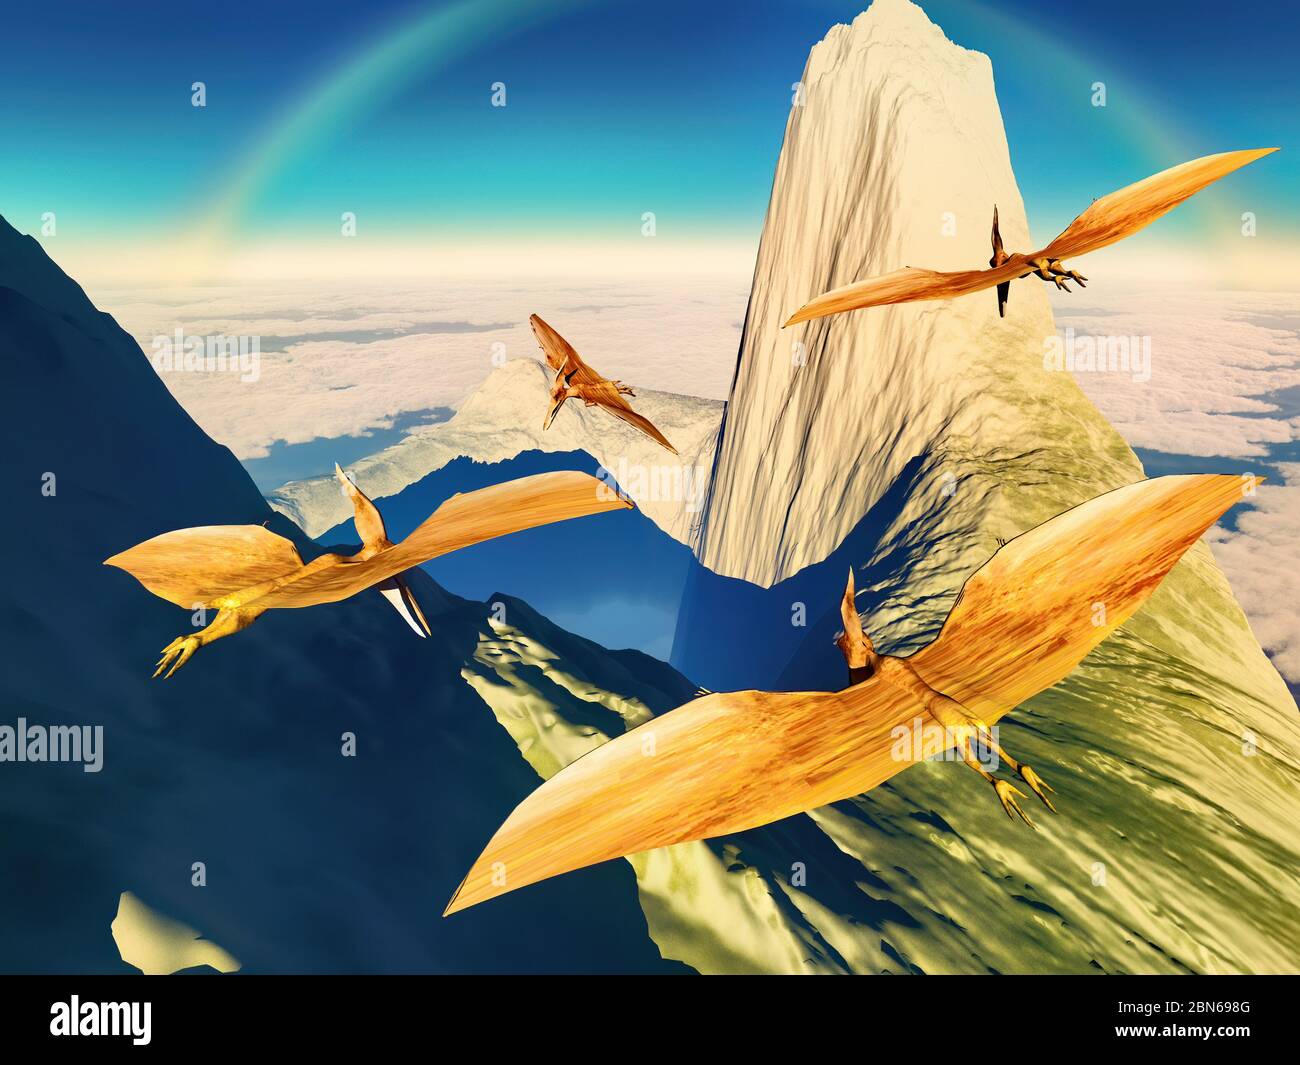 Flying pterodactyl against the volcanic crrater 3d illustration Stock Photo